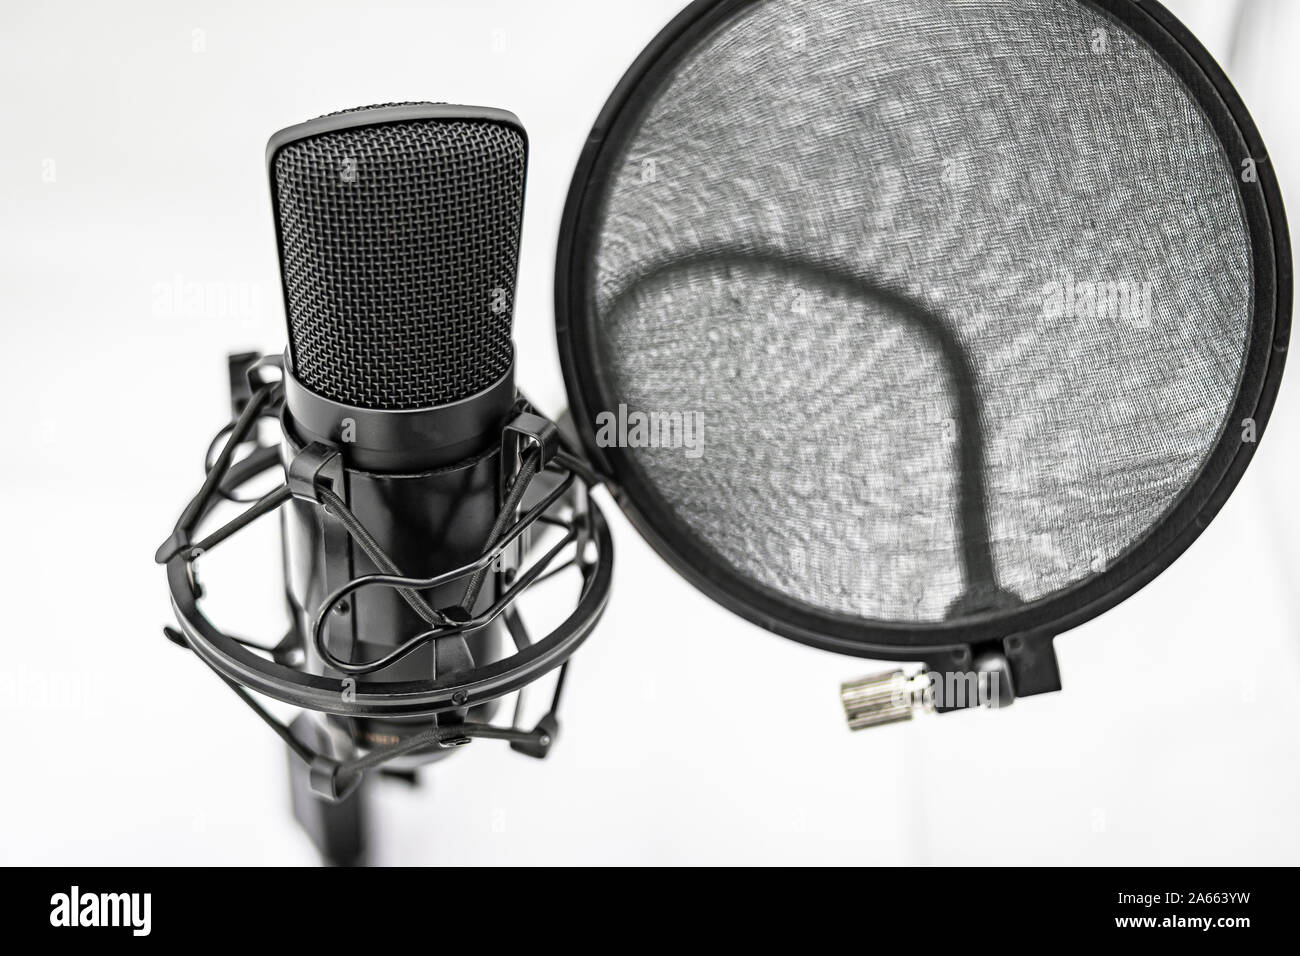 Large capsule condenser microphone with stand and antipop filter Stock Photo